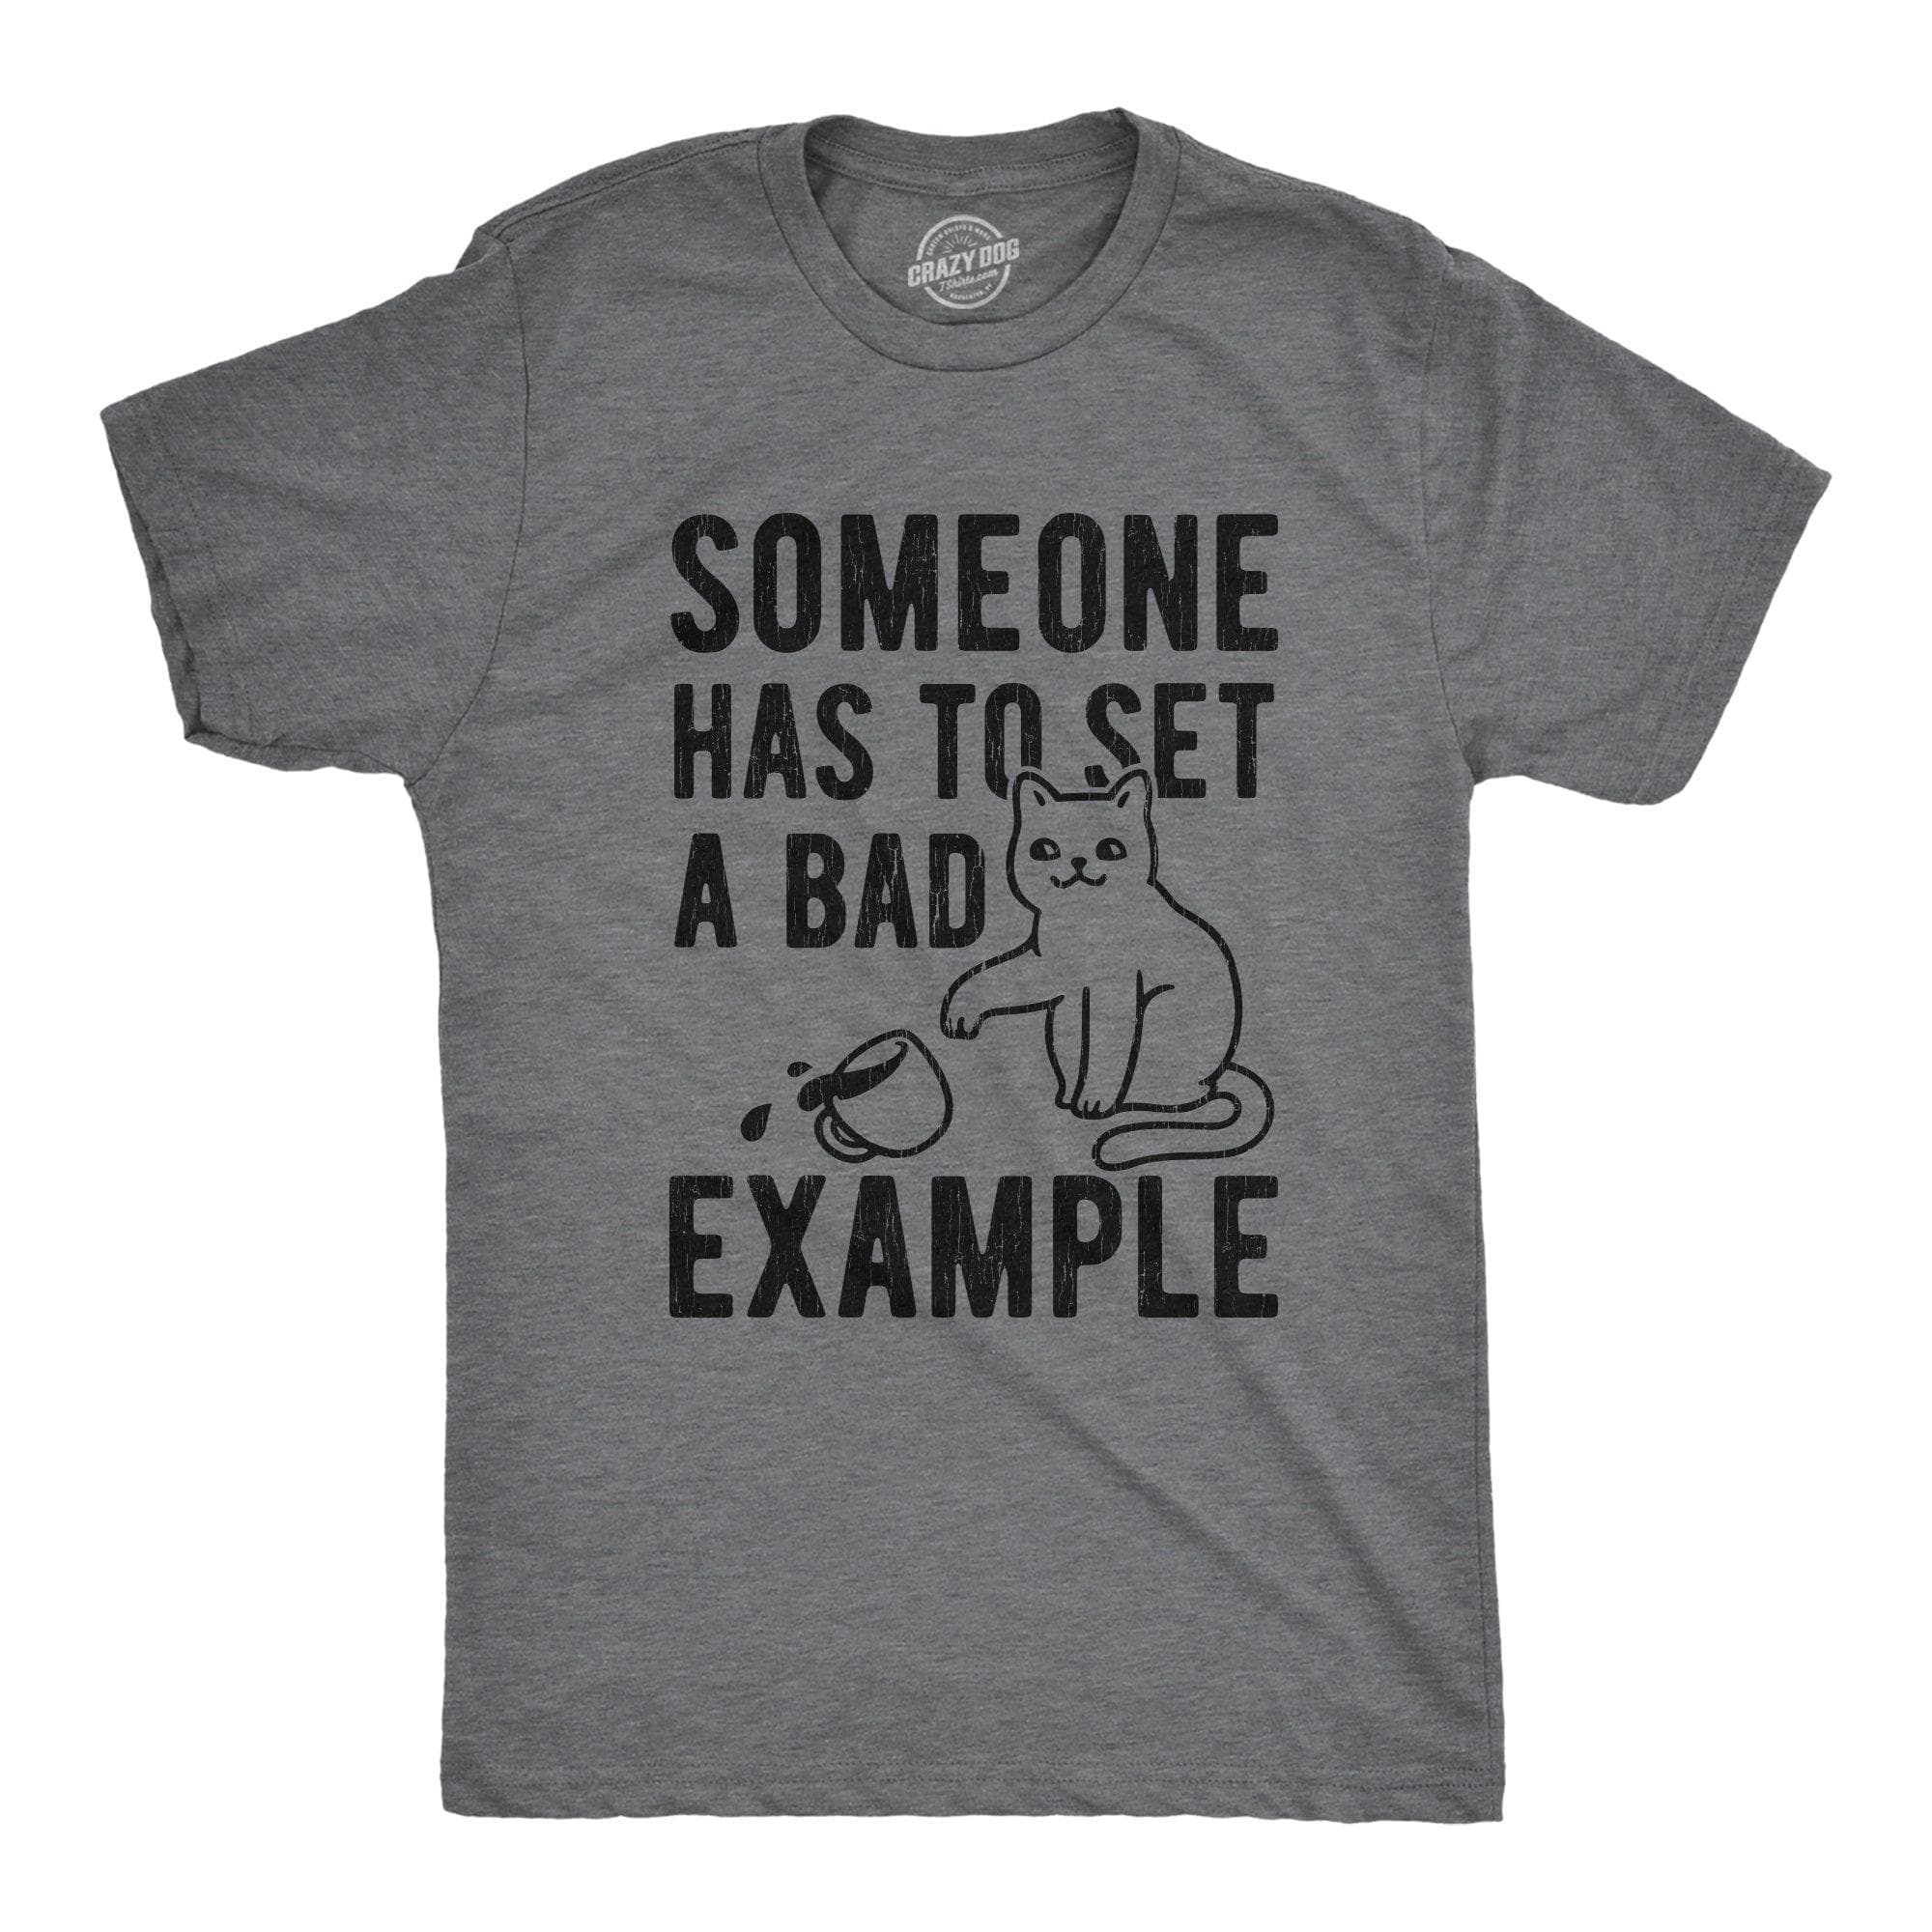 Someone Has To Set A Bad Example Men's Tshirt - Crazy Dog T-Shirts